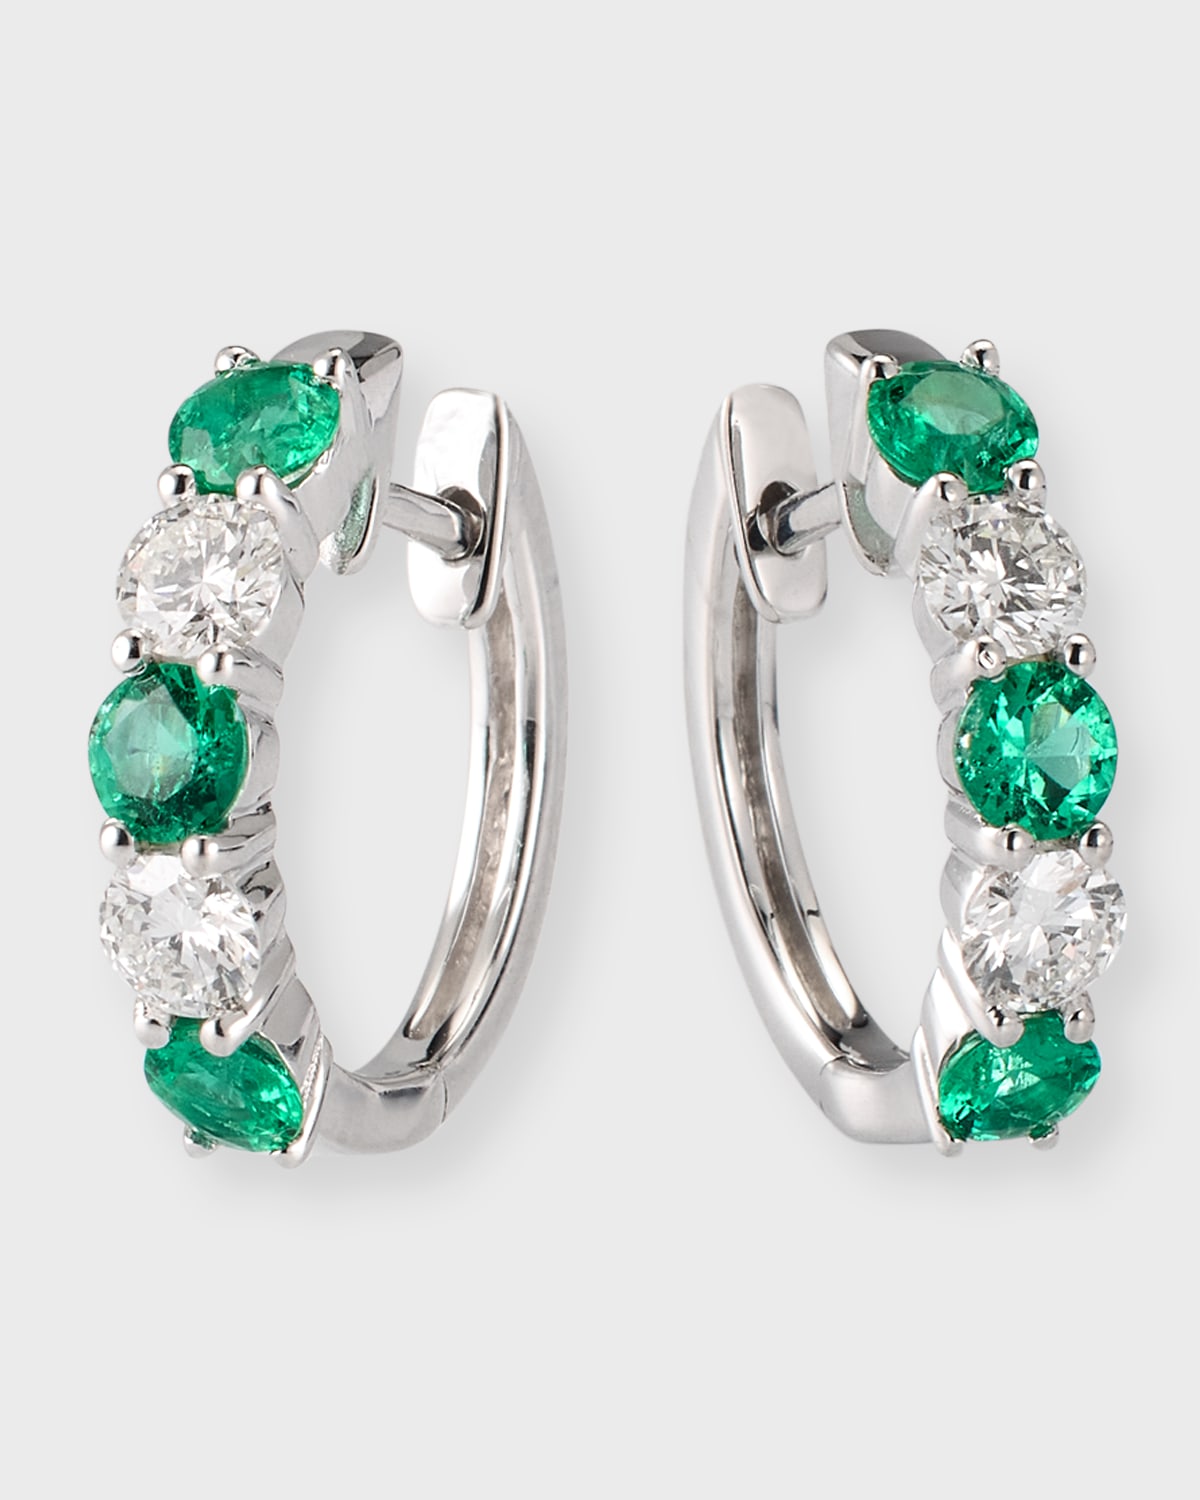 David Kord 18k White Gold Earrings With 3.3mm Alternating Emeralds And Diamonds